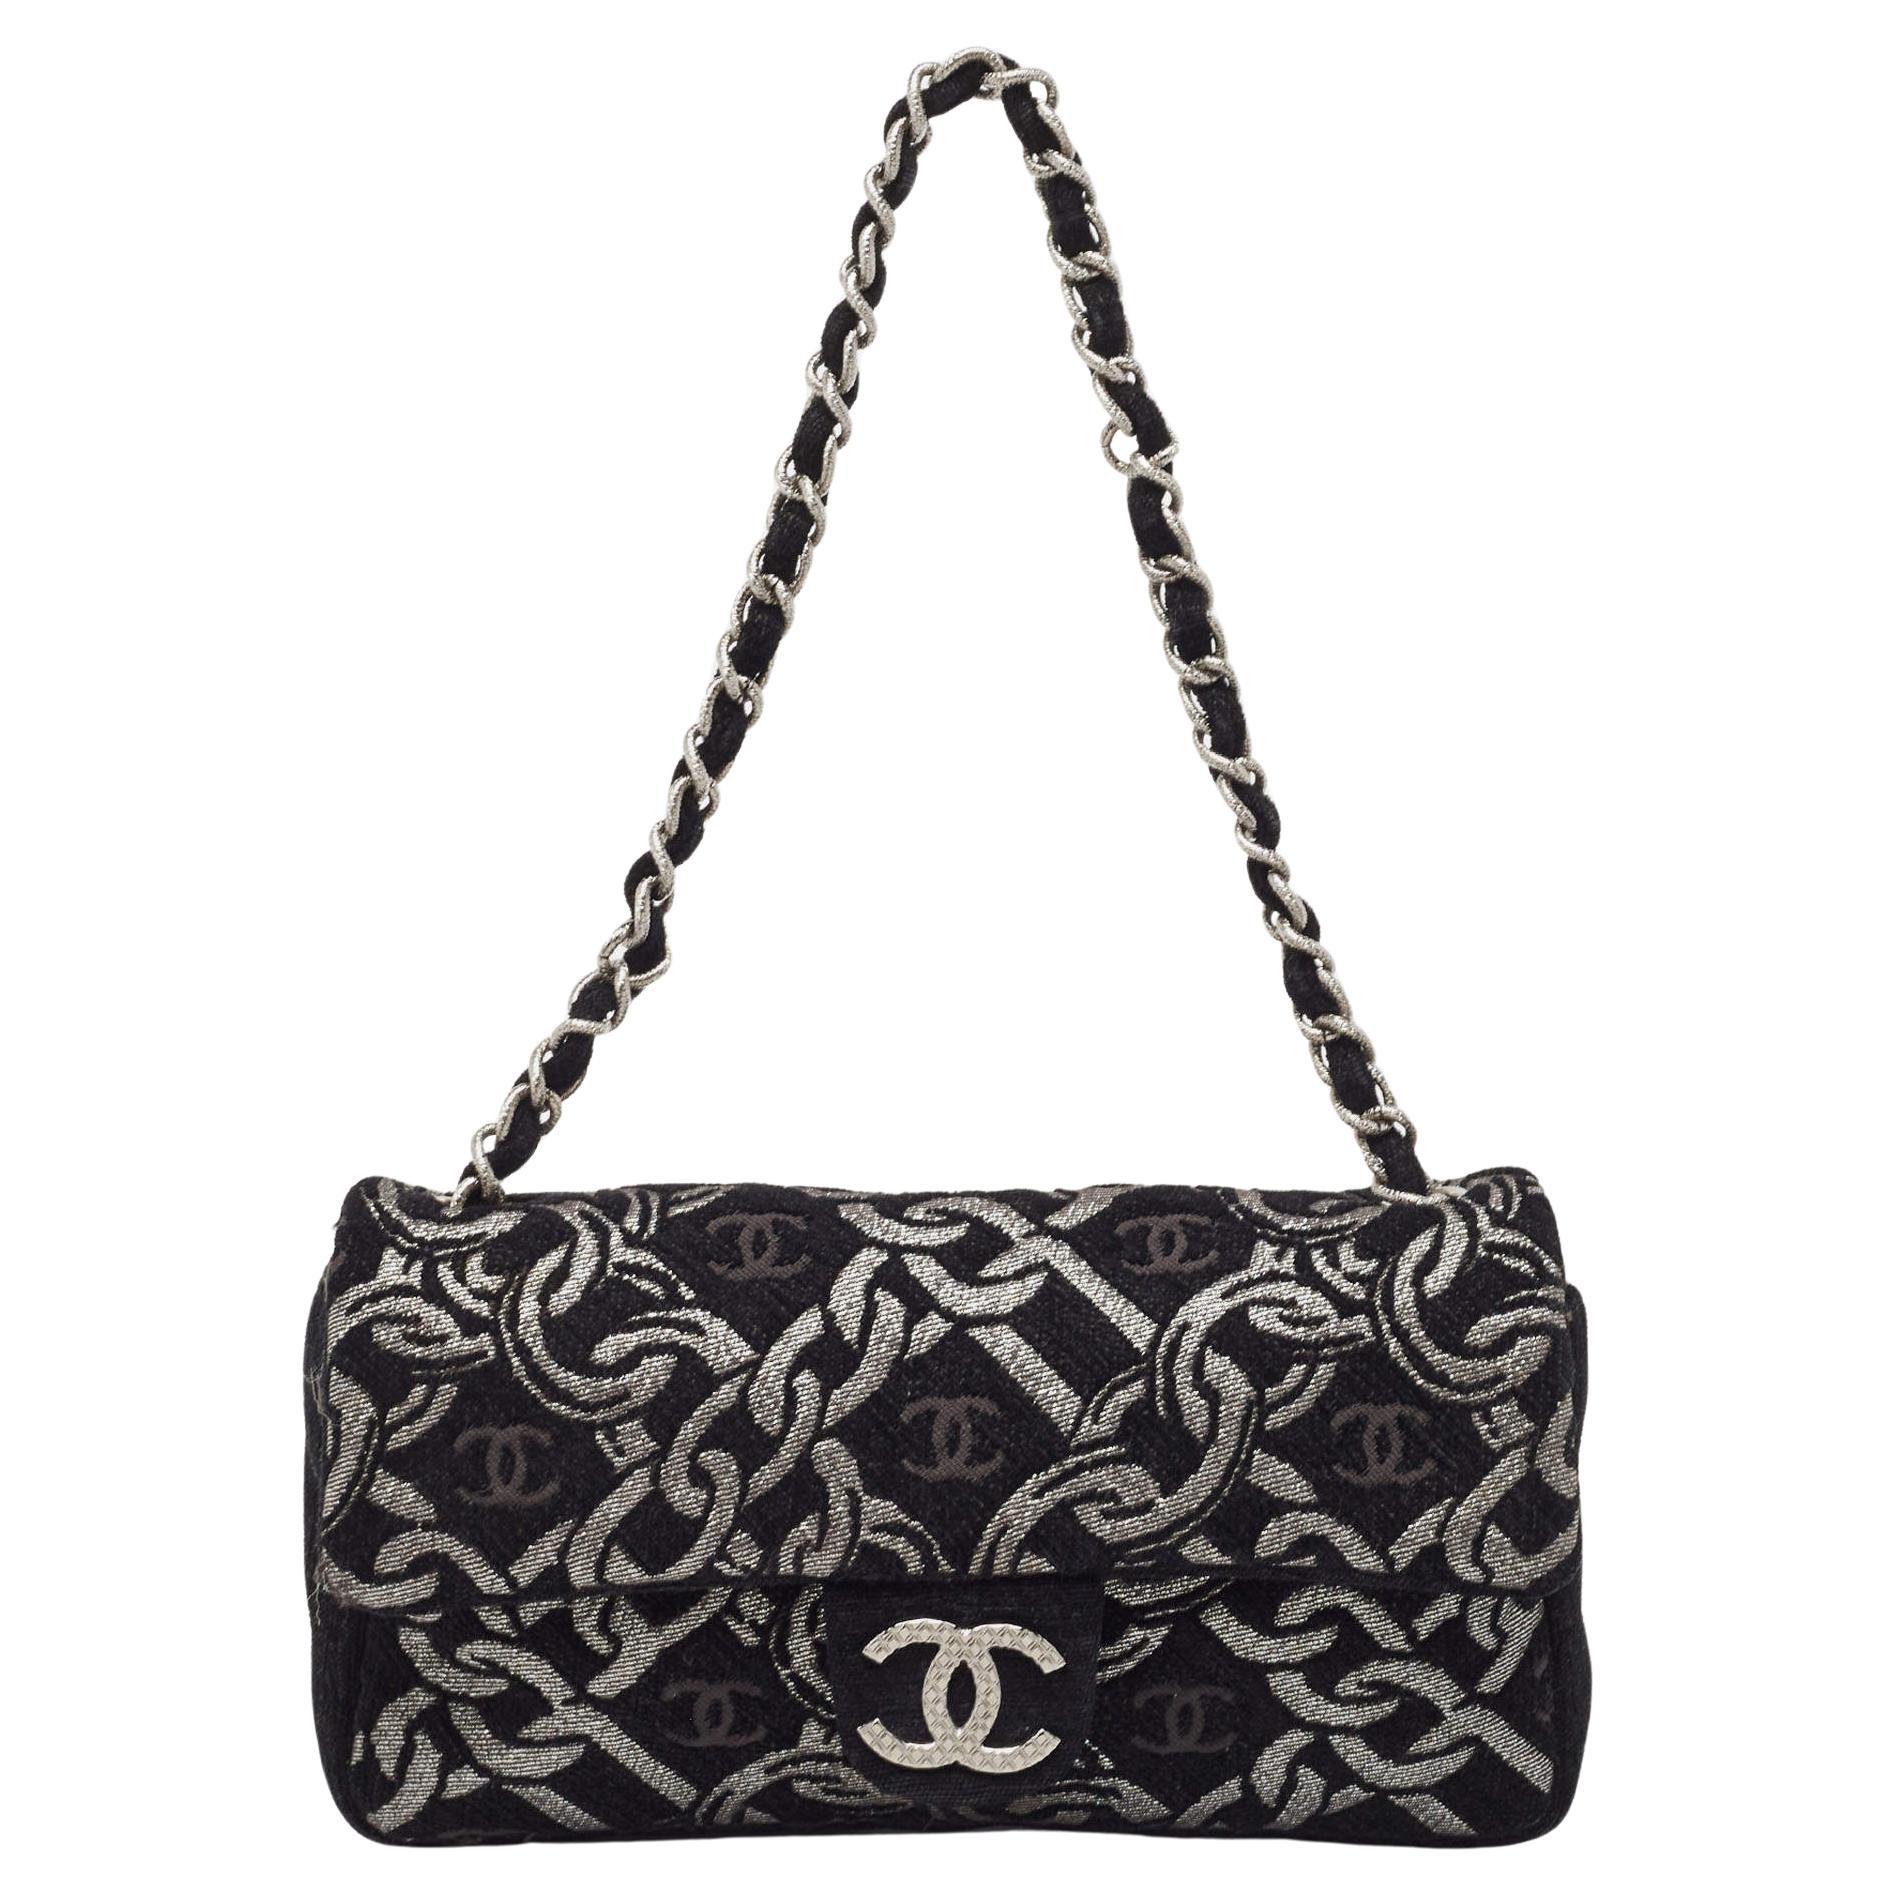 Chanel Black/Silver Printed Tweed CC Chainlink Flap Bag For Sale